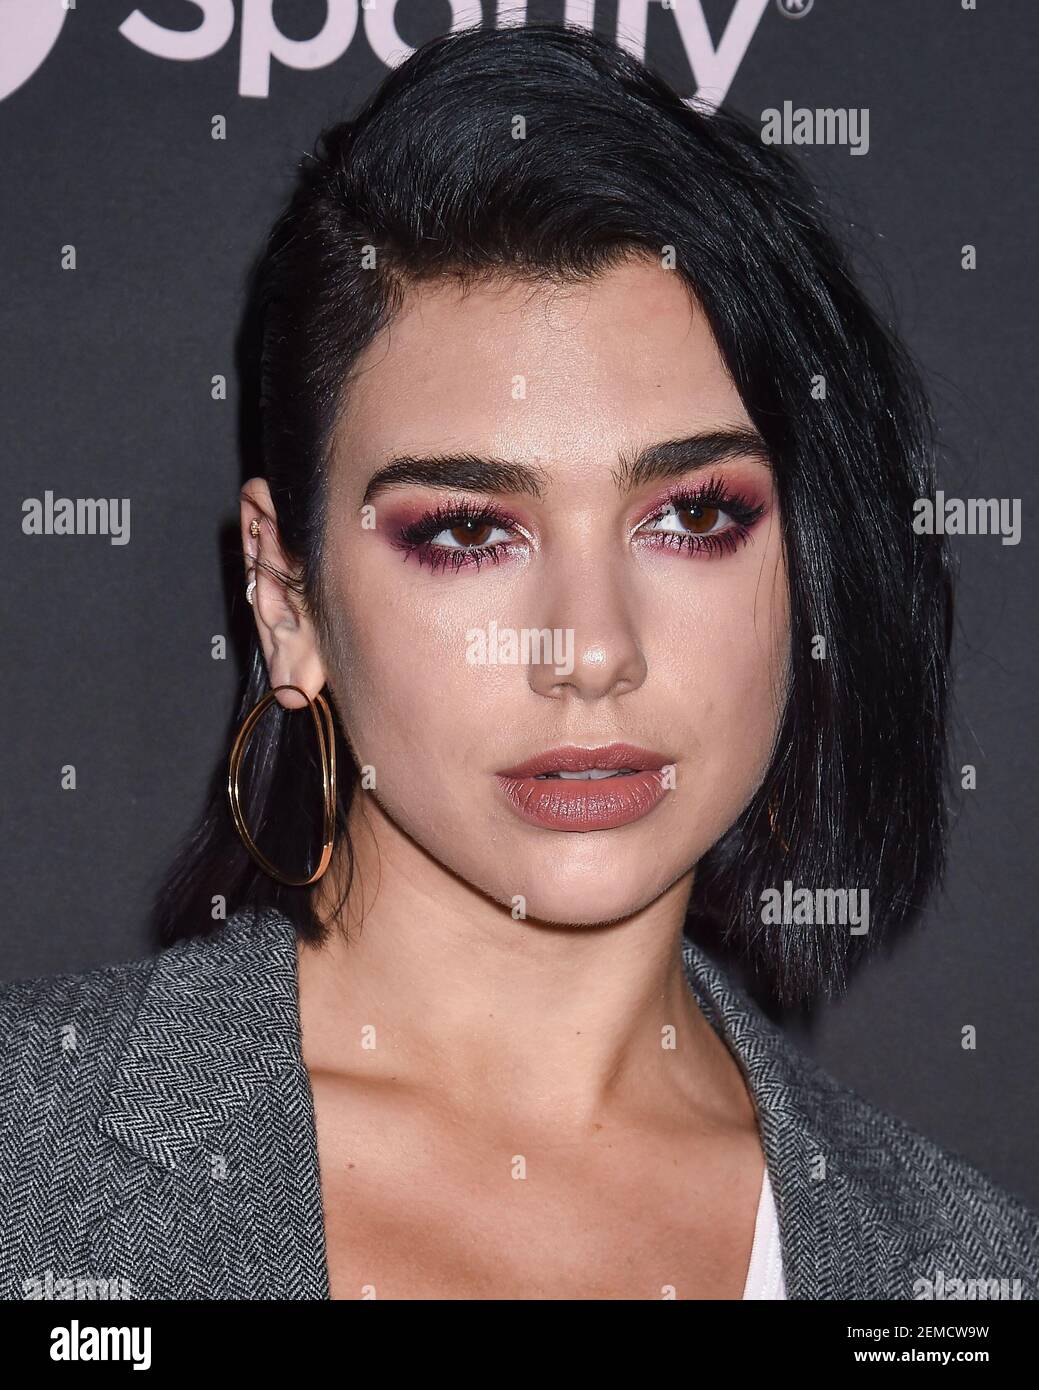 LOS ANGELES, CA, USA - FEBRUARY 07: Singer Dua Lipa wearing Calvin Klein  arrives at the Spotify Best New Artist Party 2019 held at the Hammer Museum  on February 7, 2019 in